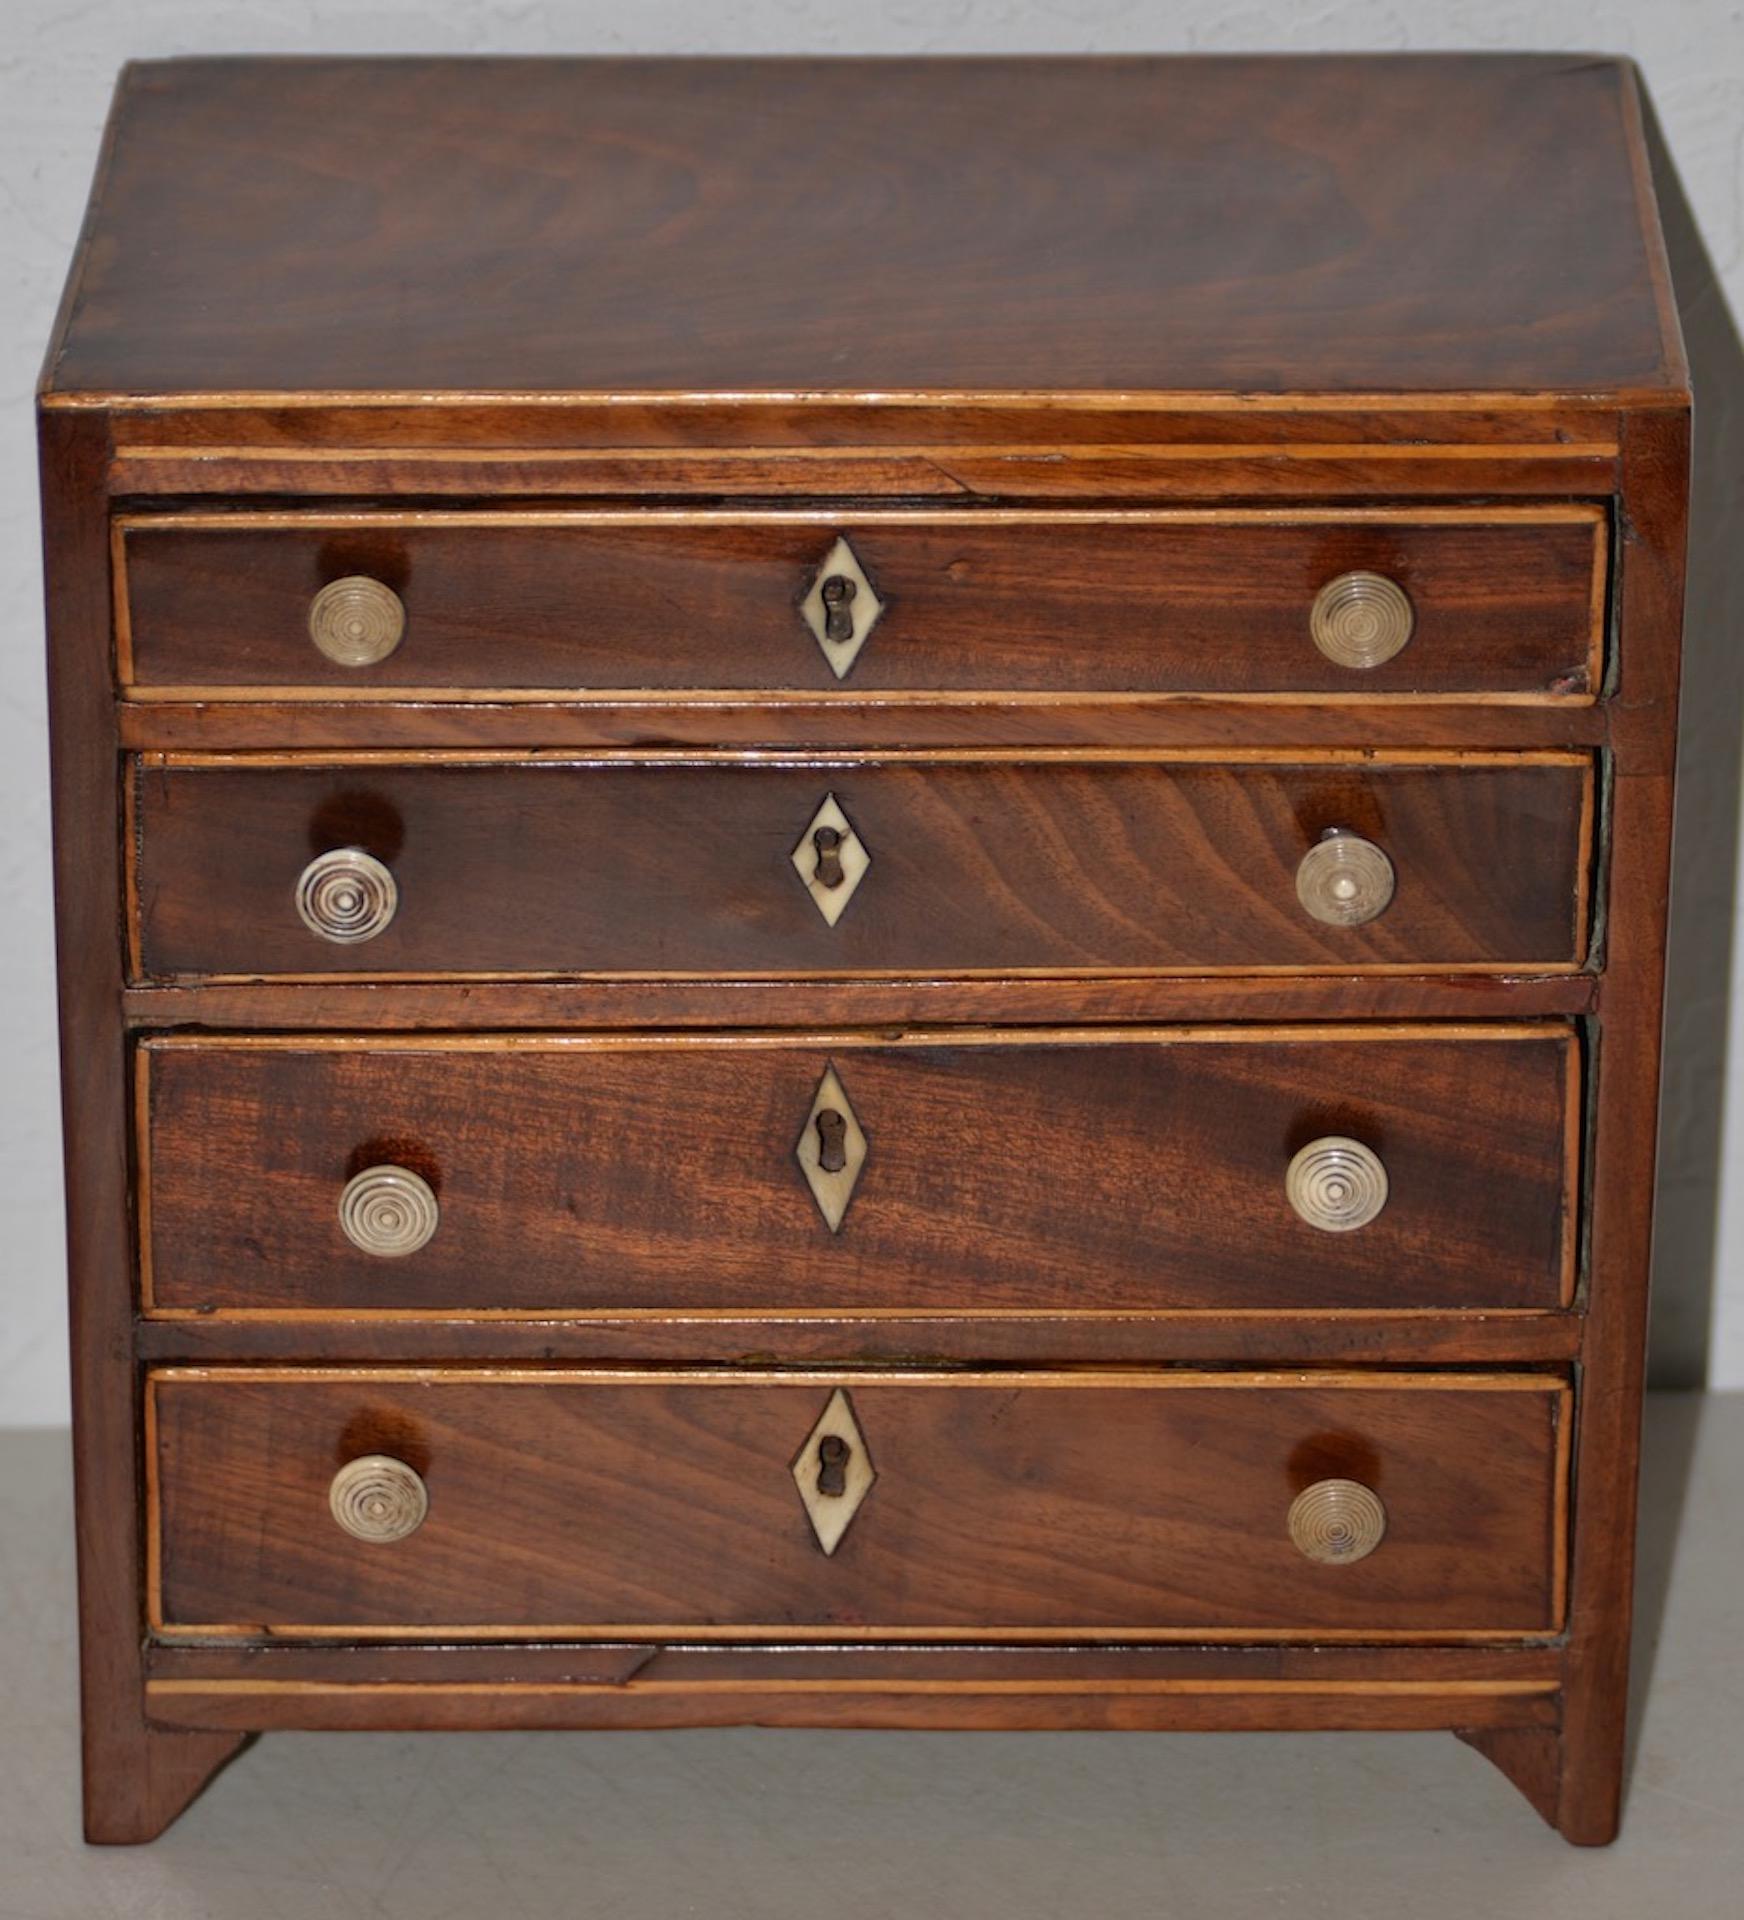 19th century miniature mahogany Salesman Sample chest of drawers with inlay

Beautiful salesman sample chest of drawers from stunning flame mahogany drawer fronts and inlay. 

The four drawer chest has inlay at the key holes, and one key fits